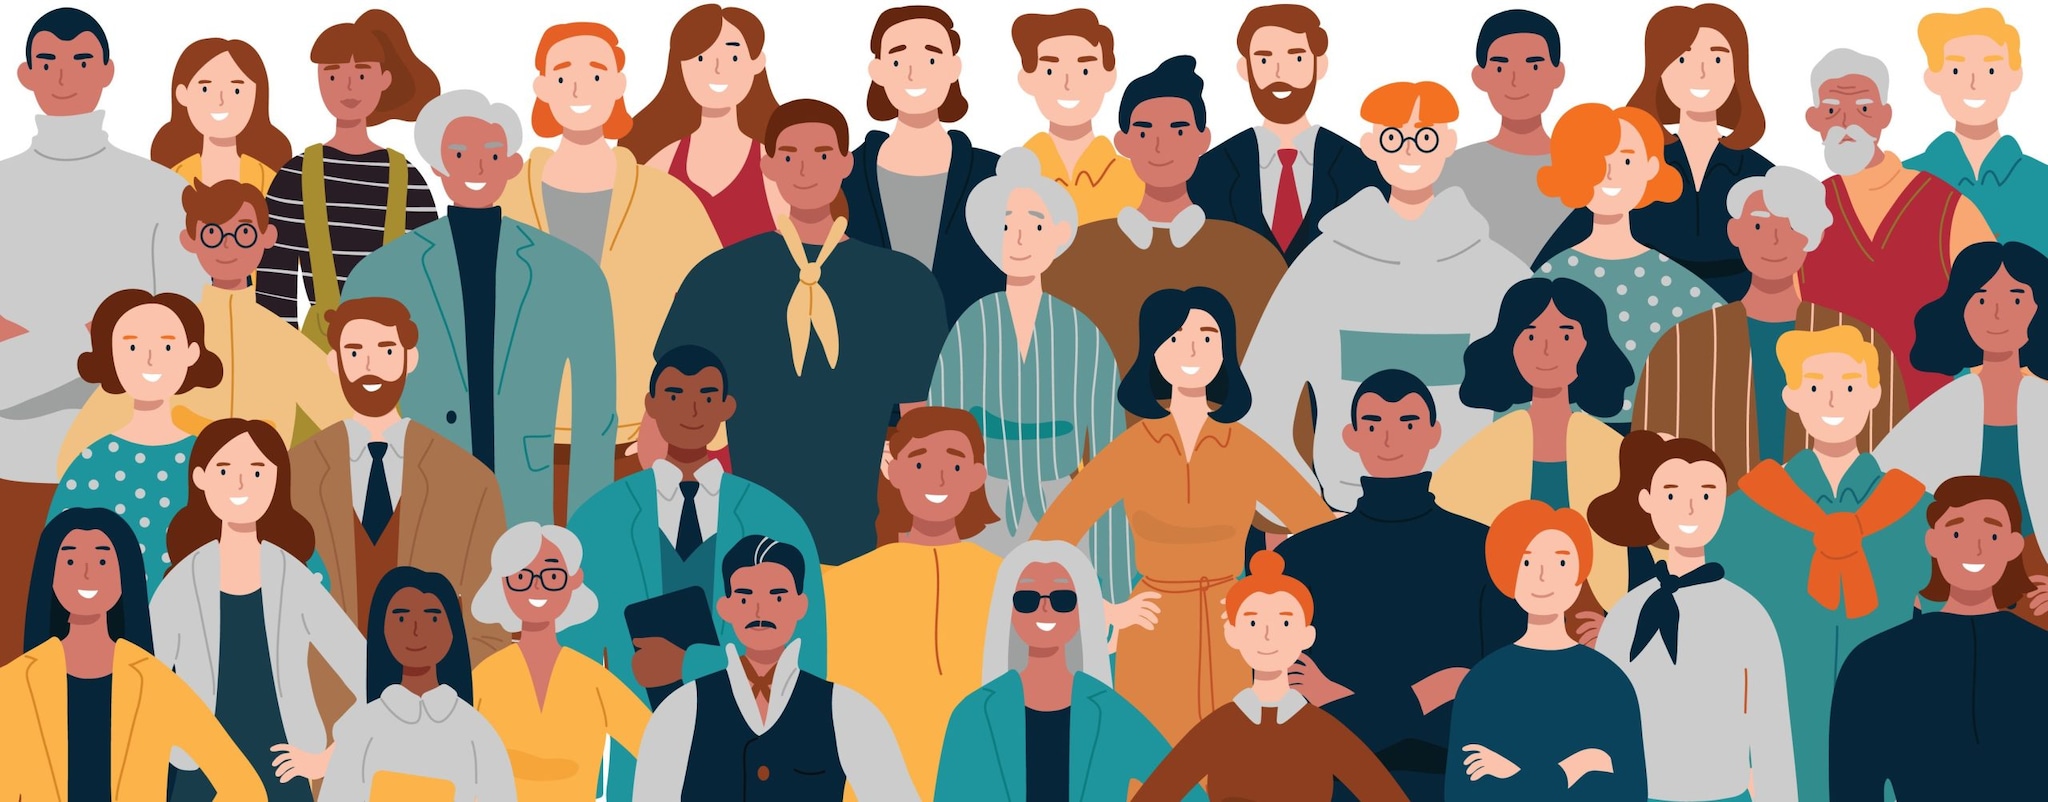 Illustration of a group of people of various ethnicities and ages.